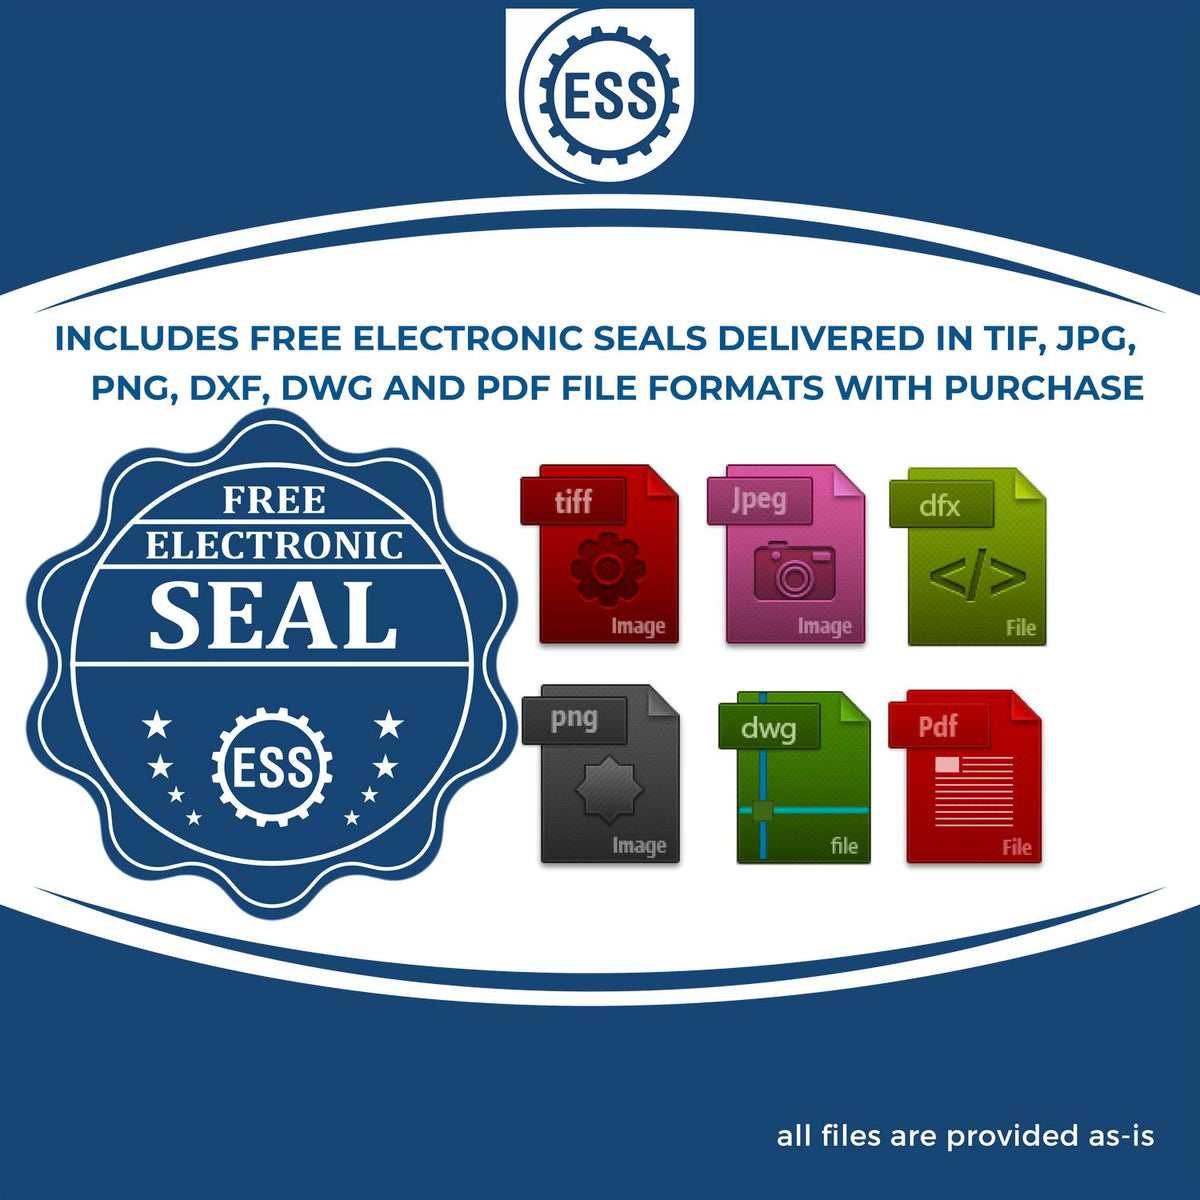 An infographic for the free electronic seal for the State of Missouri Long Reach Architectural Embossing Seal illustrating the different file type icons such as DXF, DWG, TIF, JPG and PNG.